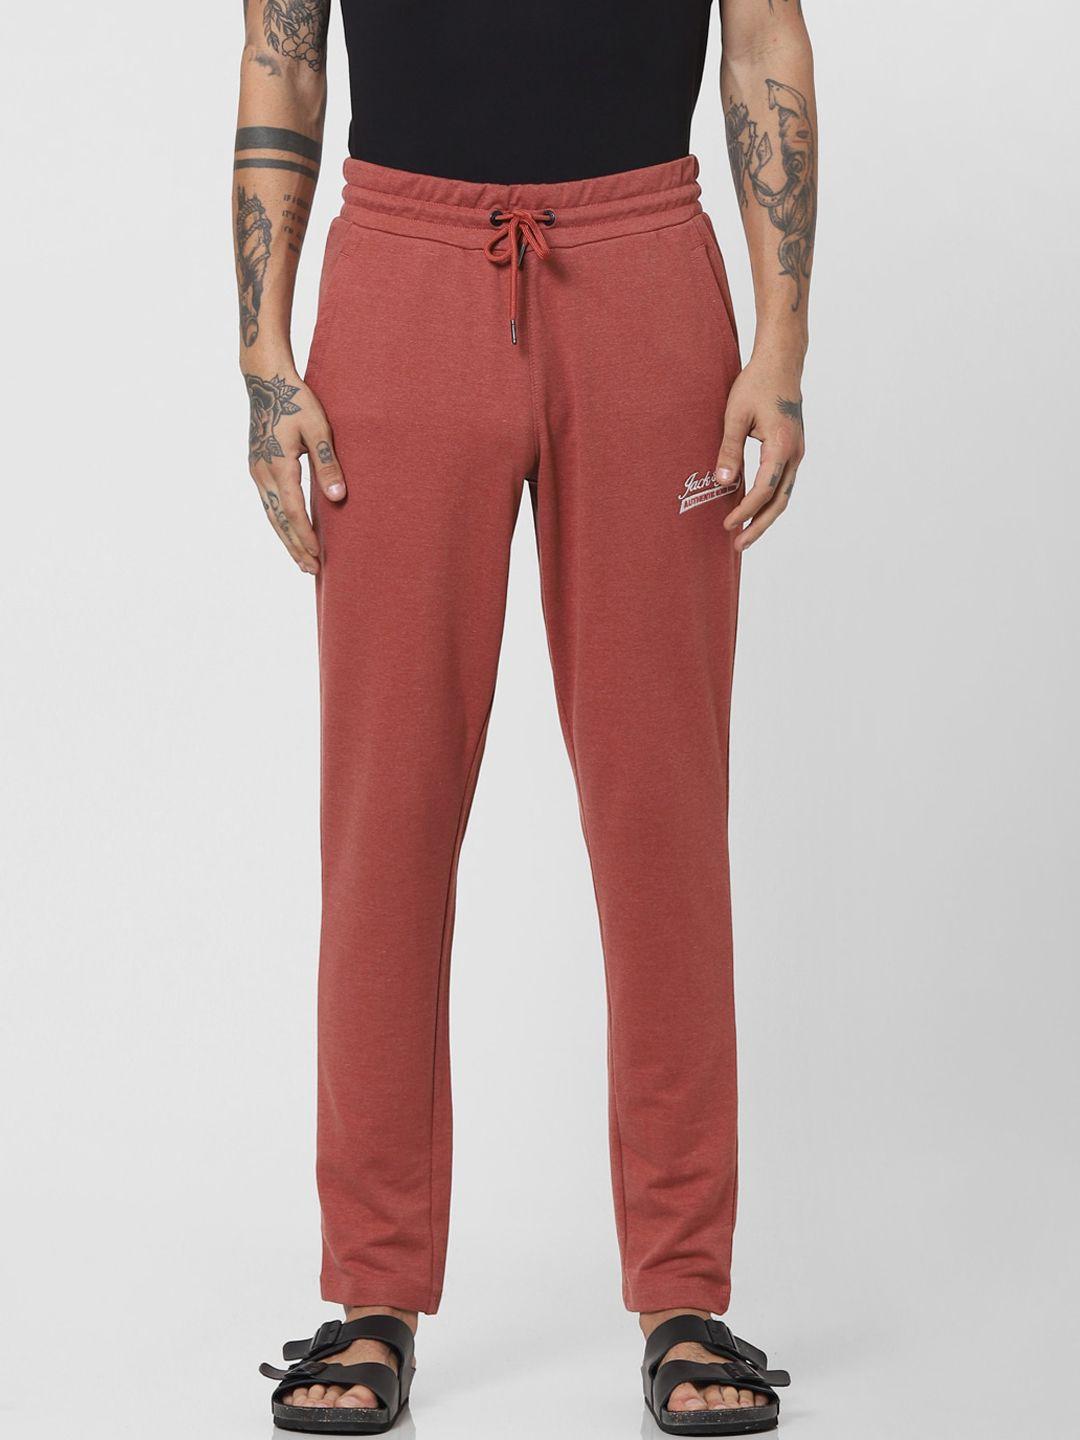 jack-&-jones-men-coral-red-solid-pure-cotton-relaxed-fit-track-pants